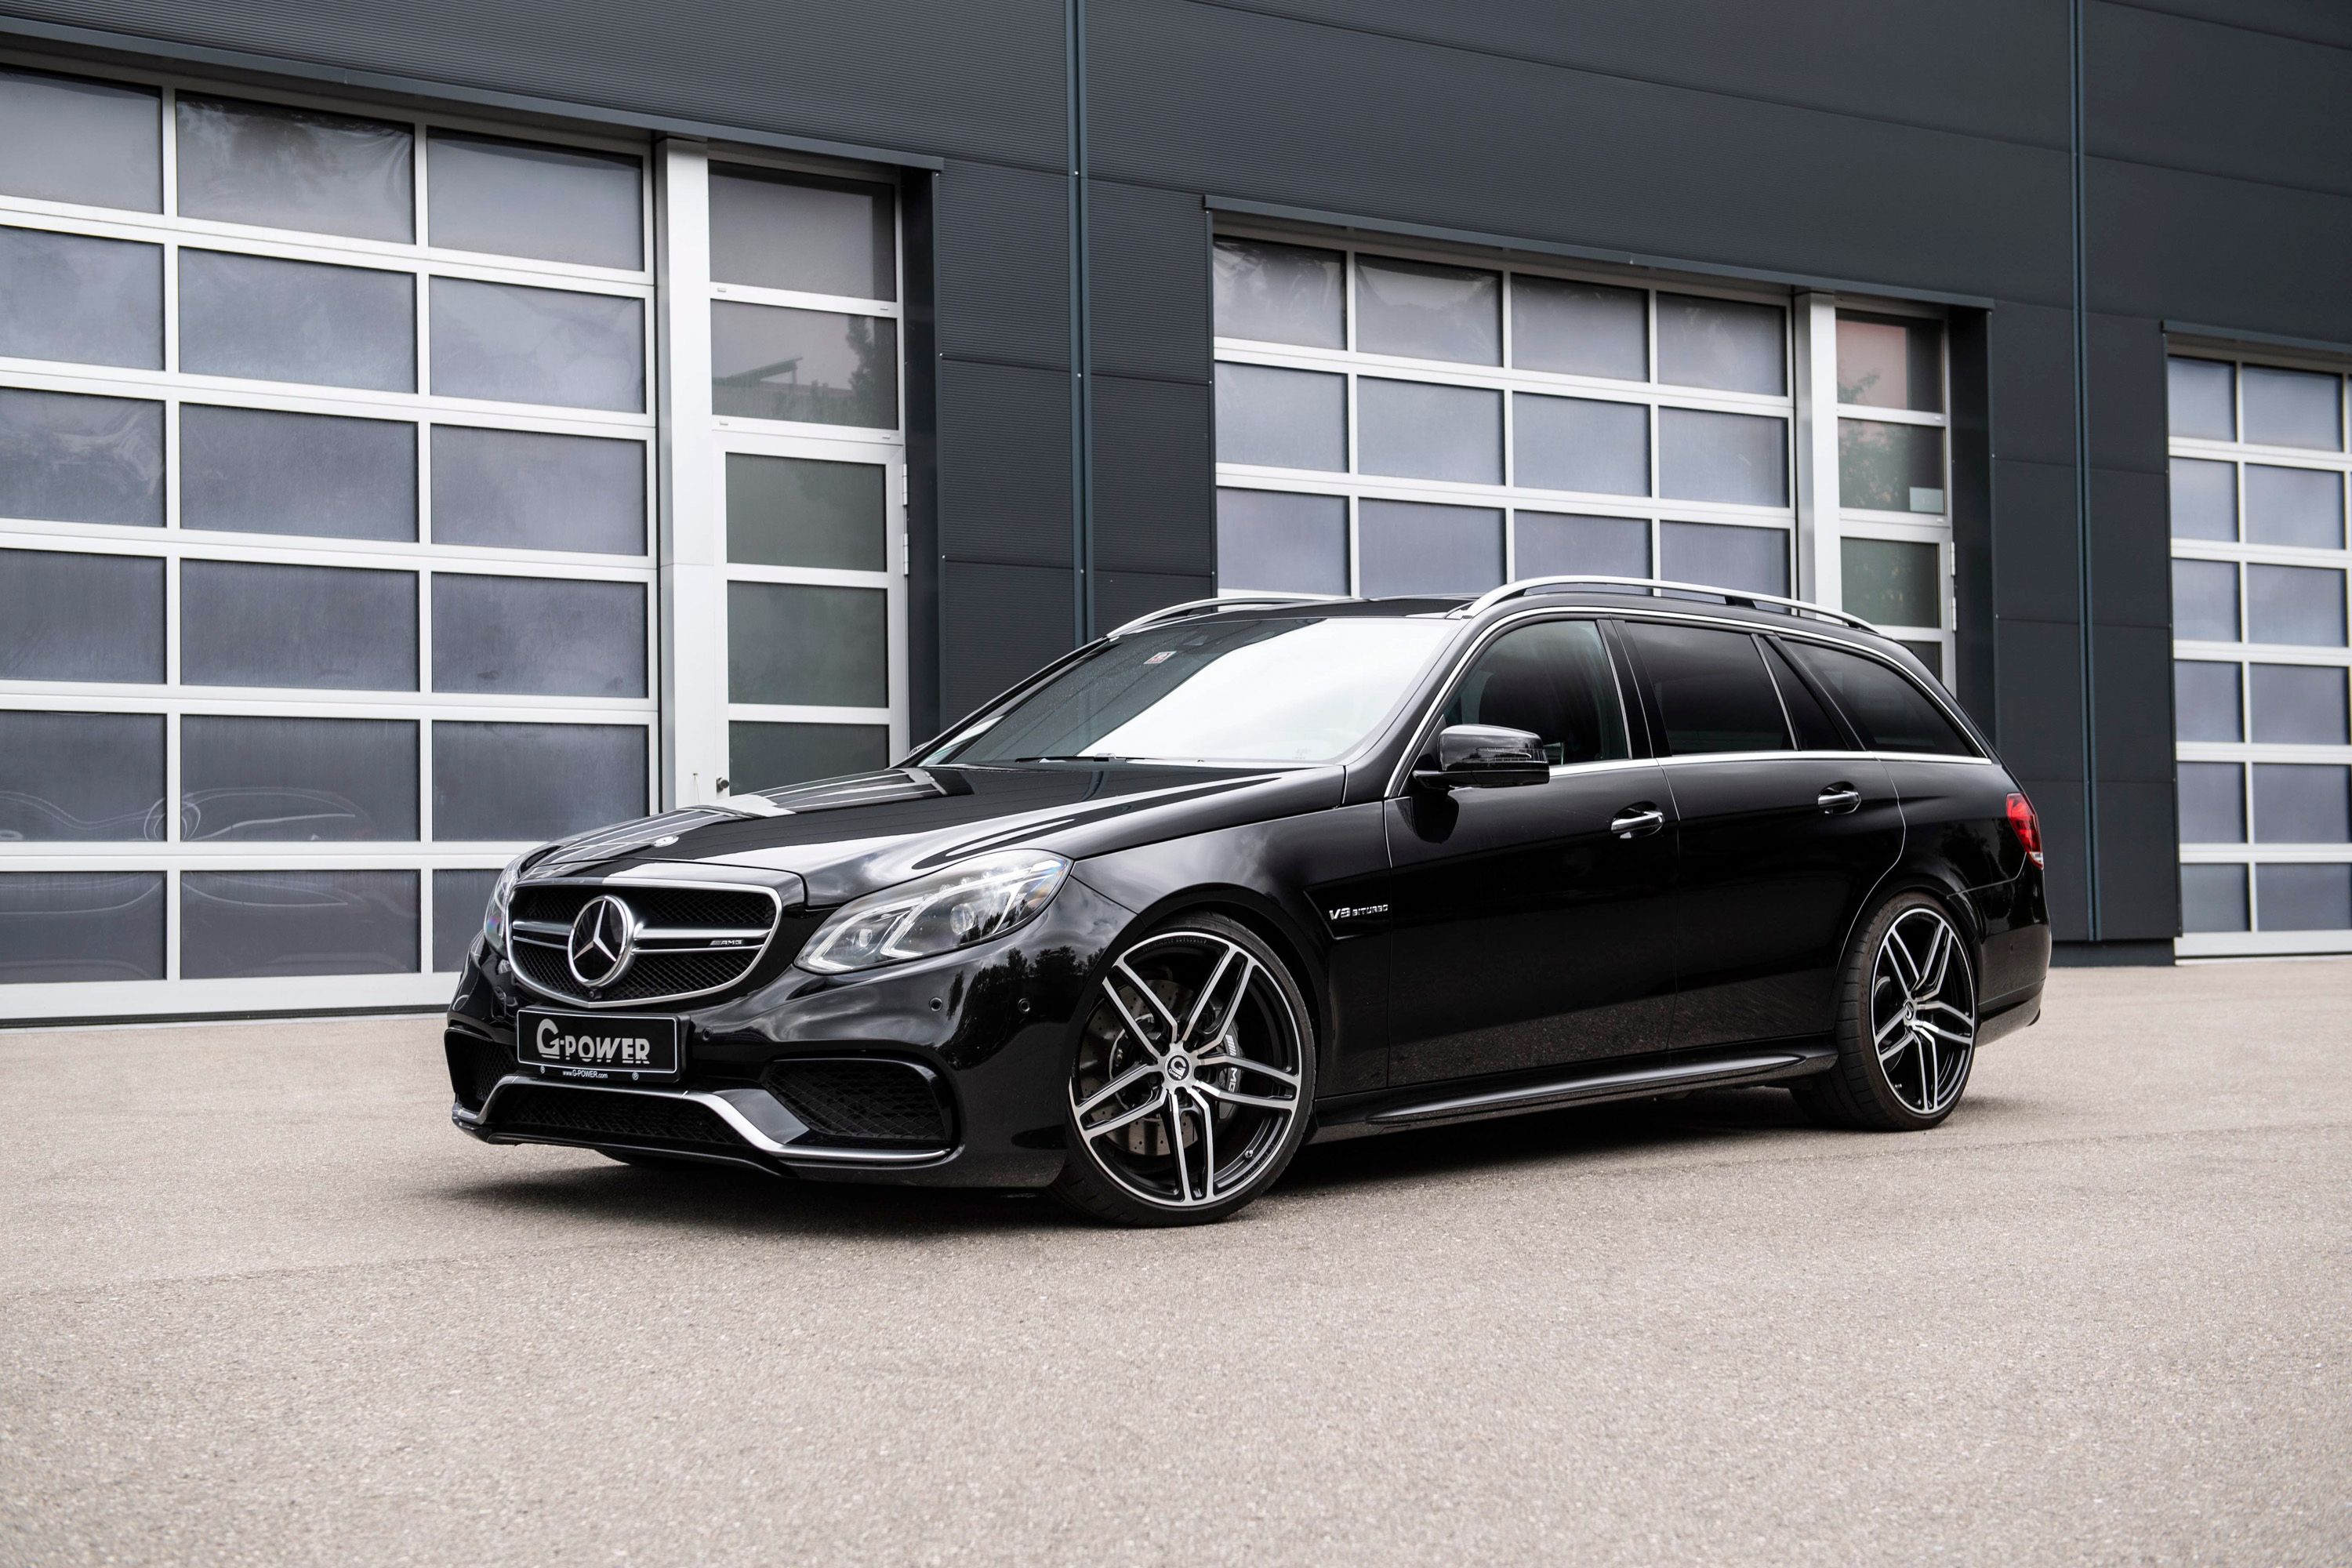 2018 Mercedes-AMG E63 S Wagon by G-Power